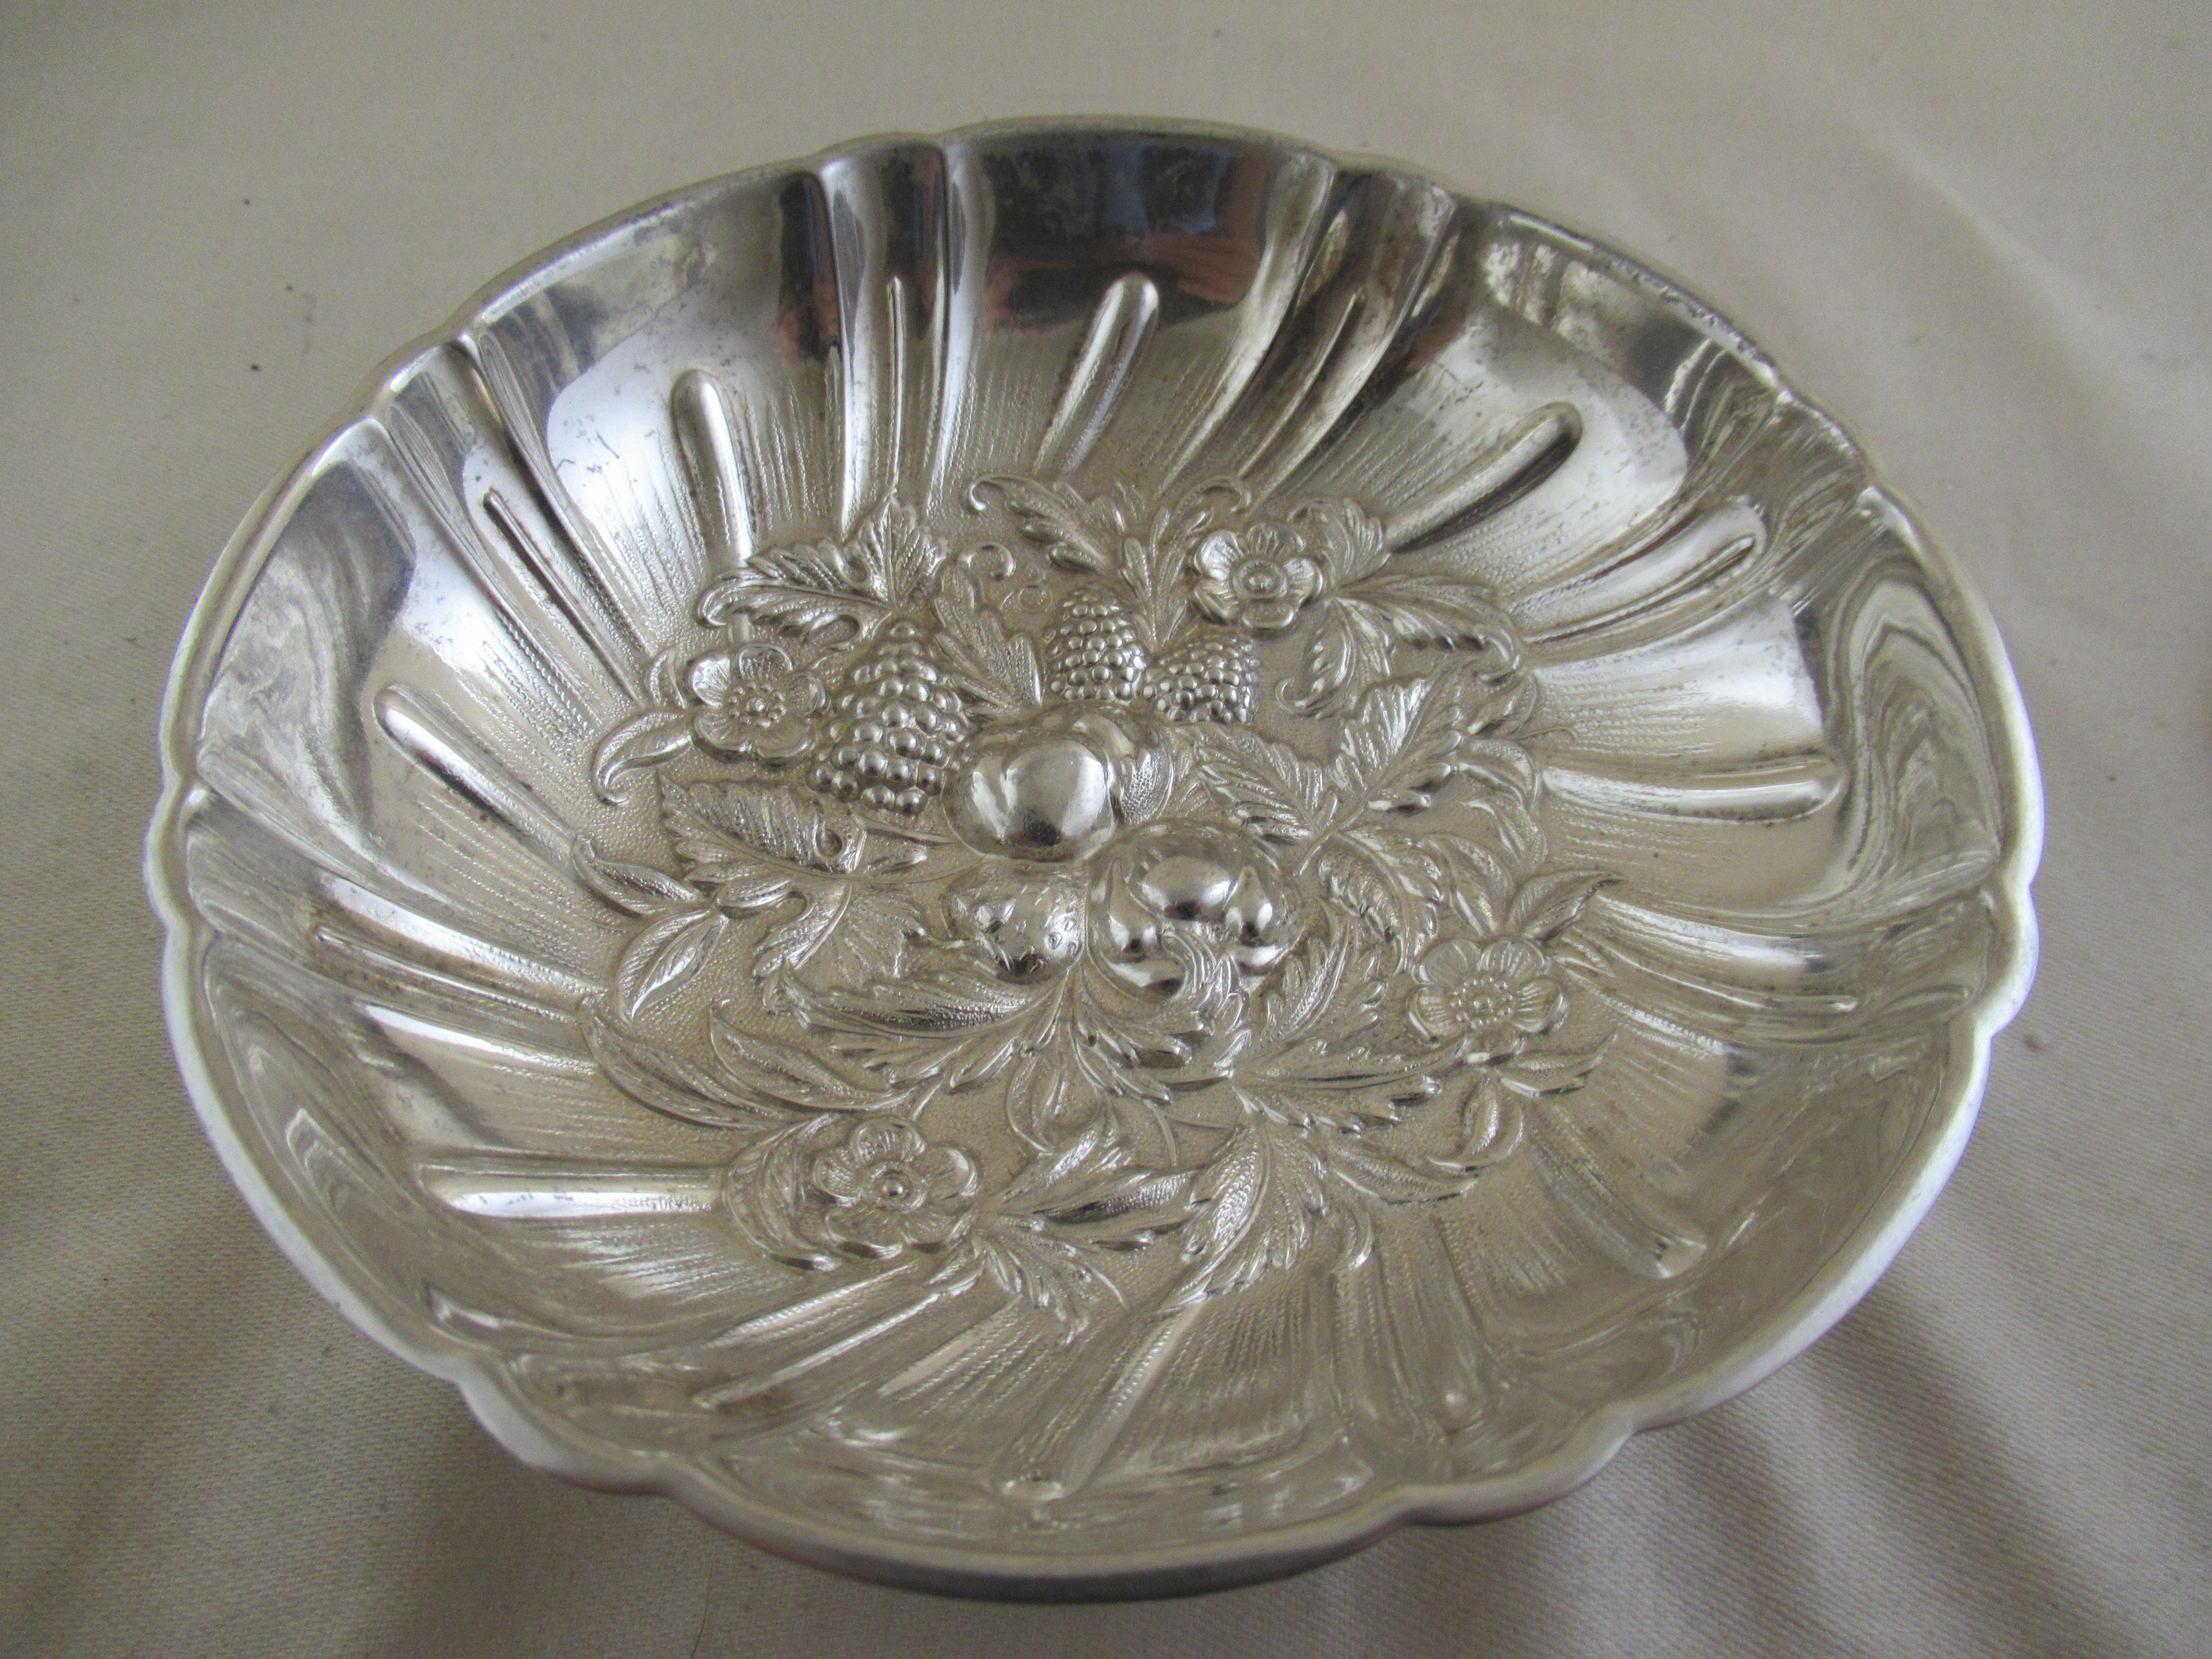 Solid Sterling Silver Repousse sweetmeat dish & matching spoon
Made by S.KIRK & SONS of BALTIMORE, MARYLAND
--------------
A superb, round dish with a turned edge all round the sides to give extra strength. 
Repoussé decorated in the base with